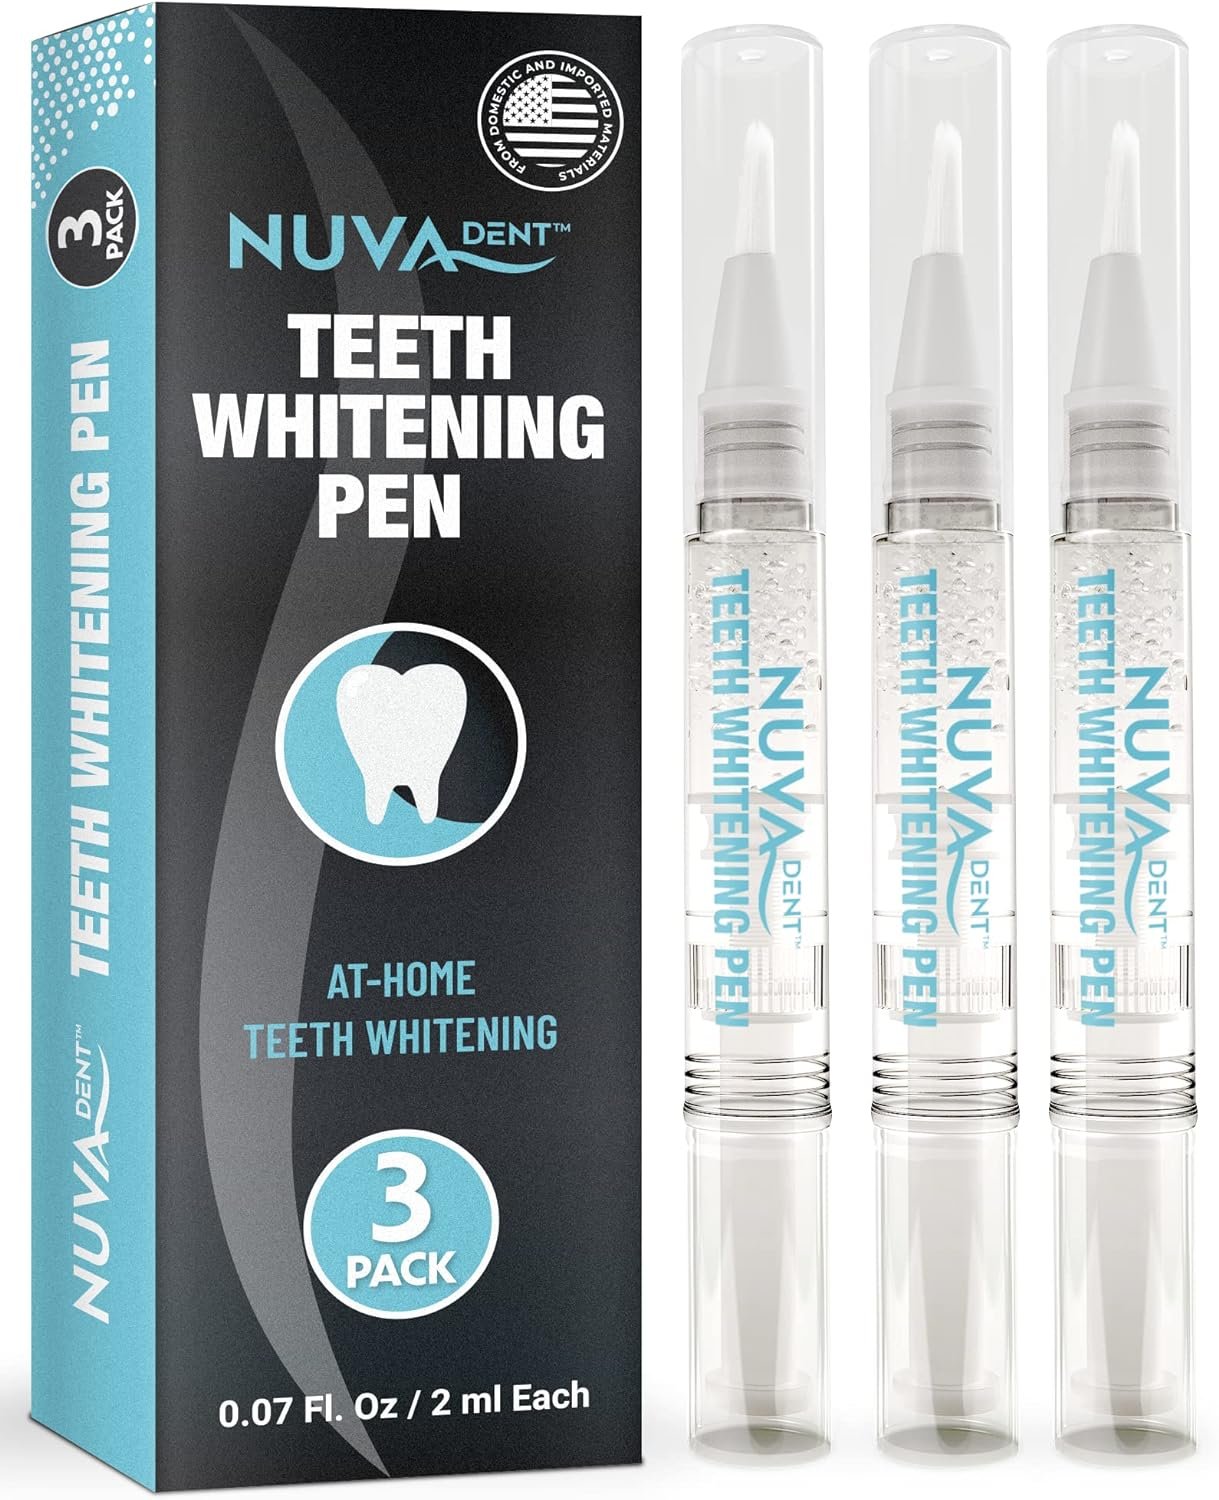 Sensitive Teeth Whitening Pens - Tooth Whitening Pens Made in USA - 35% Carbamide Peroxide Whitening Gel Teeth Stain Remover - Teeth Whitener, Blanqueador de Dientes Profesional (3 Pcs)